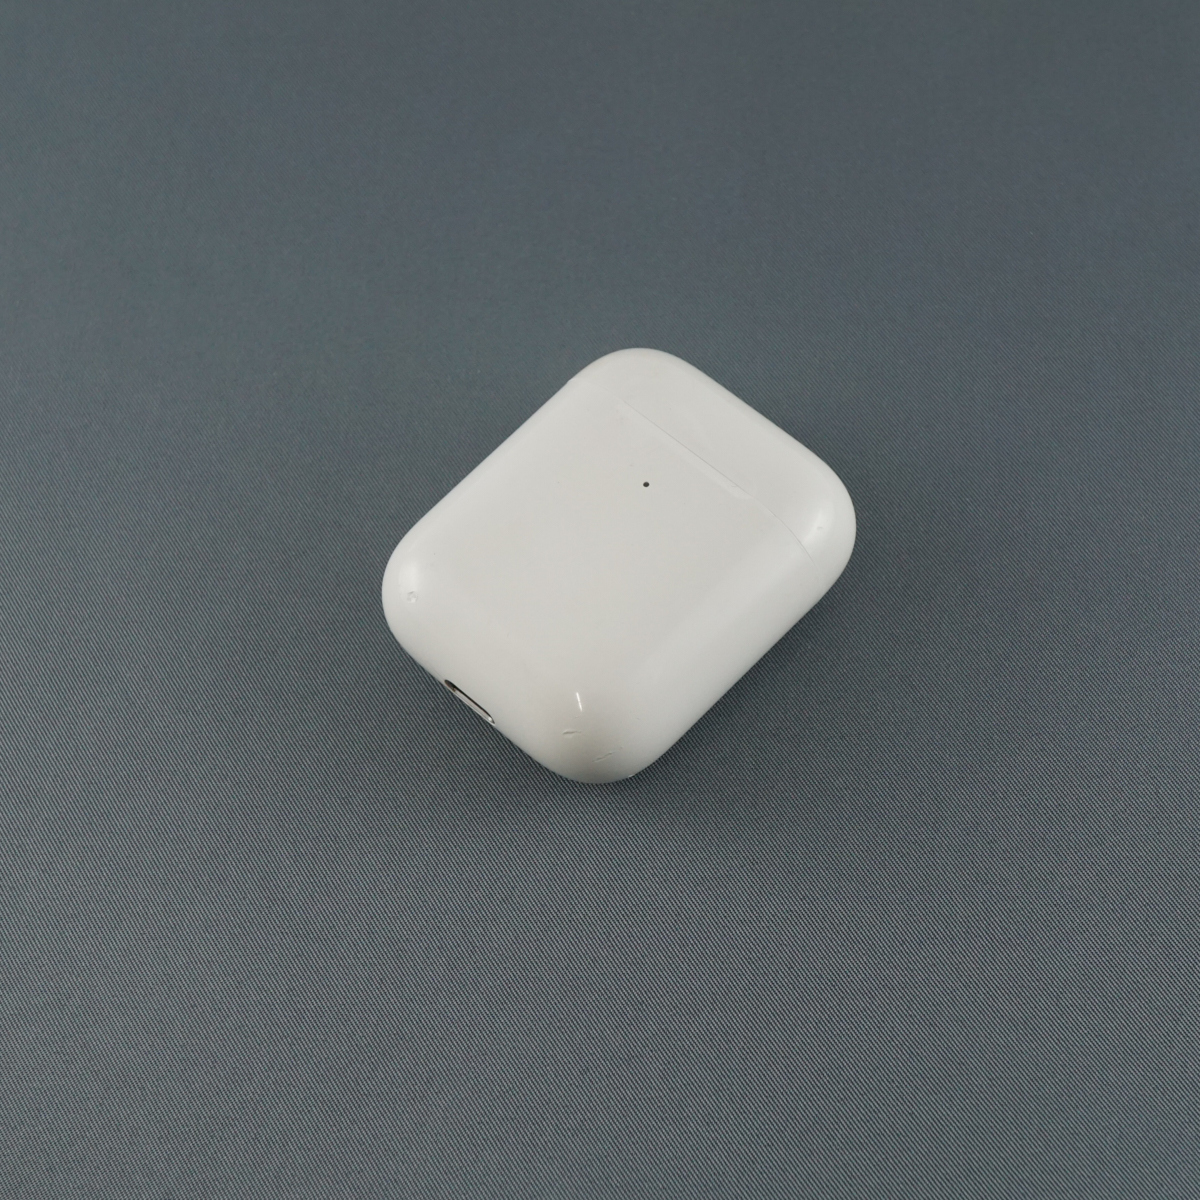 Apple AirPods with Wireless Charging Case 第2世代 MRXJ2J/A 